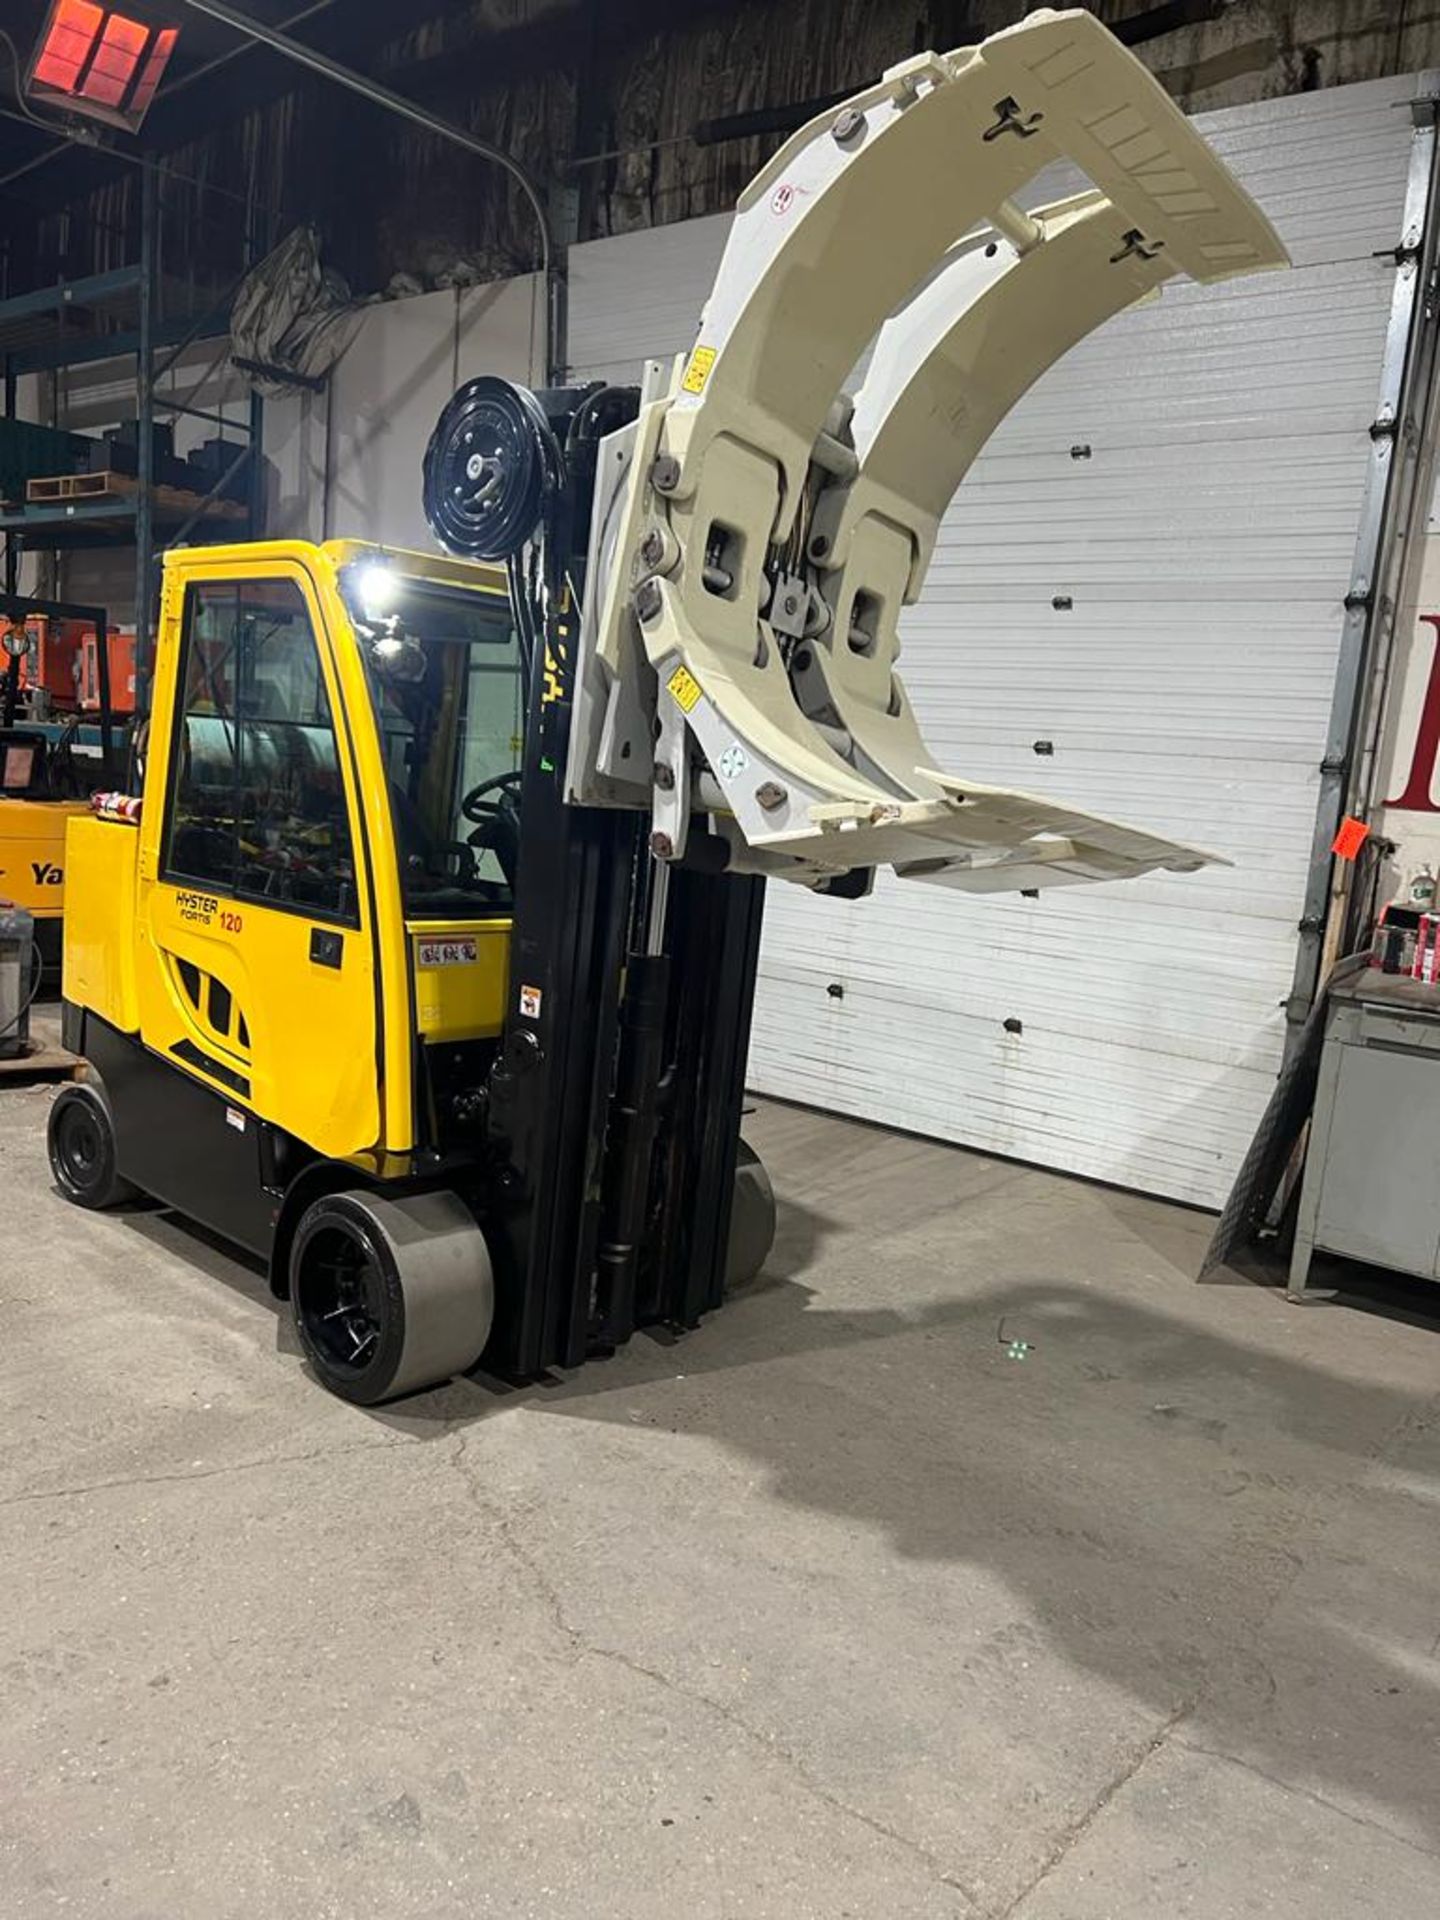 MINT ** 2017 Hyster 120 - 12,000lbs Capacity Forklift CASCADE ROLL CLAMP with CAB & Sideshift